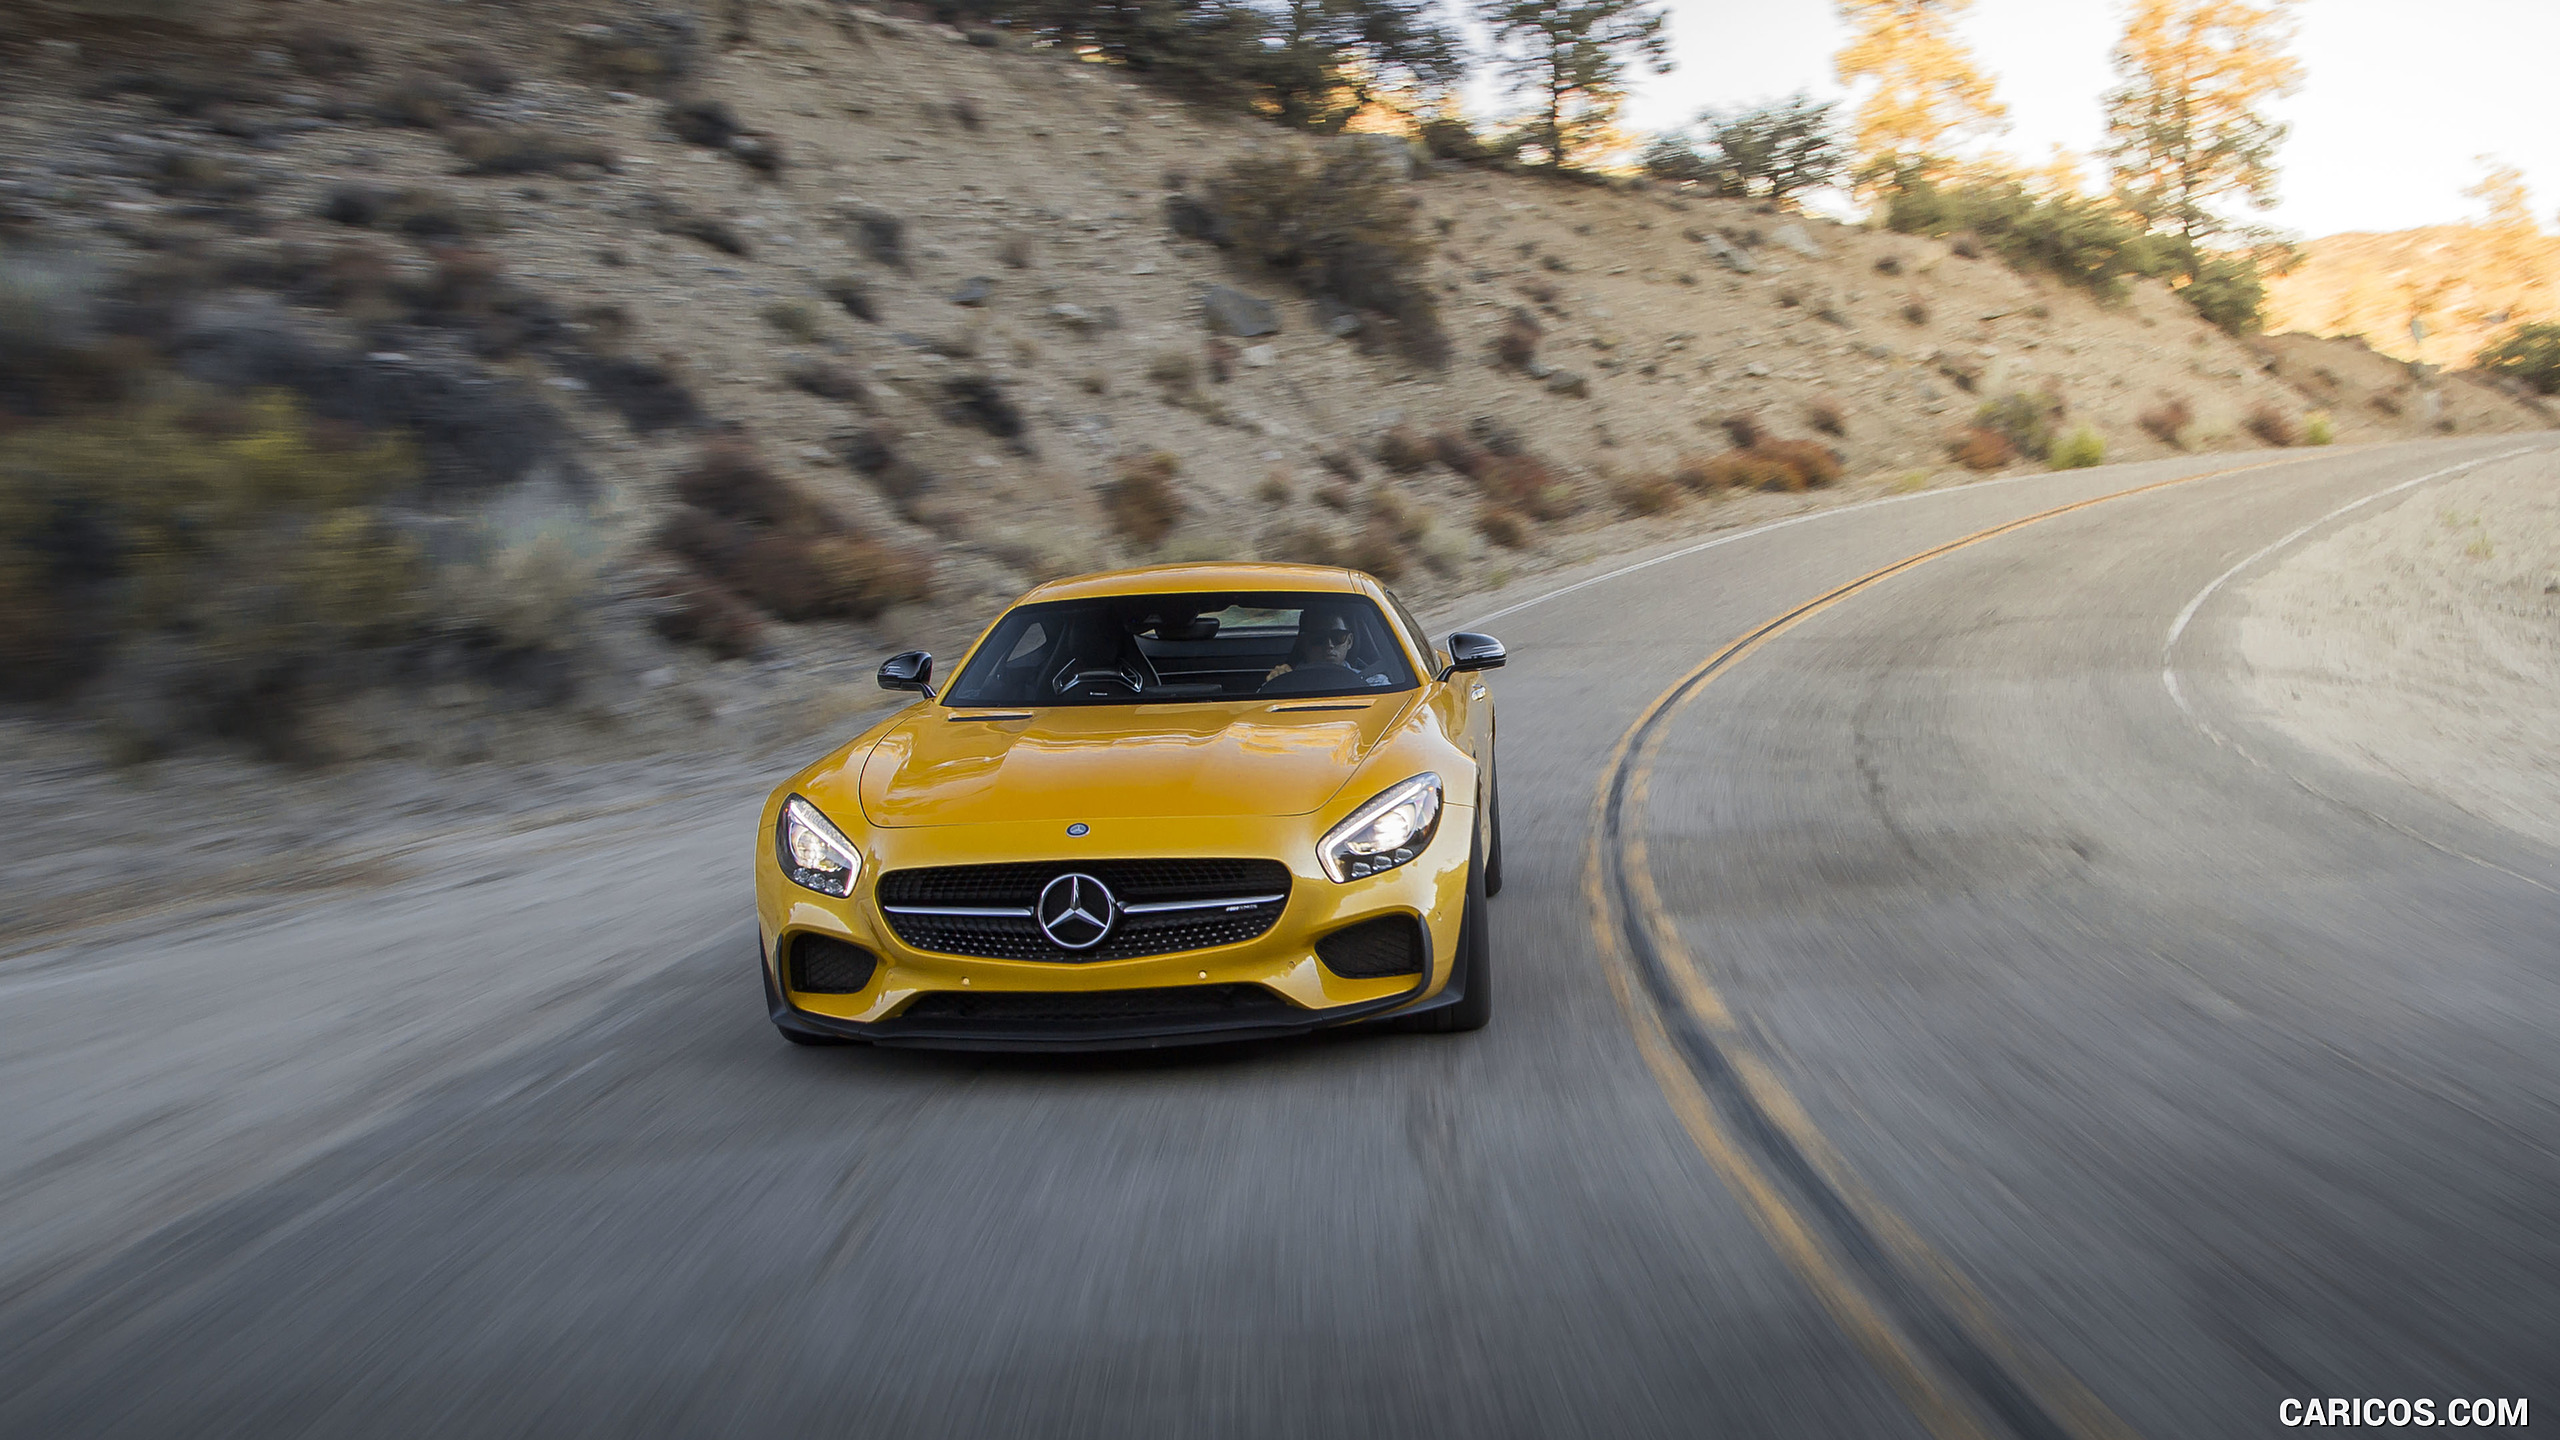 2017 Mercedes-AMG GT S (US-Spec) - Front, #24 of 55